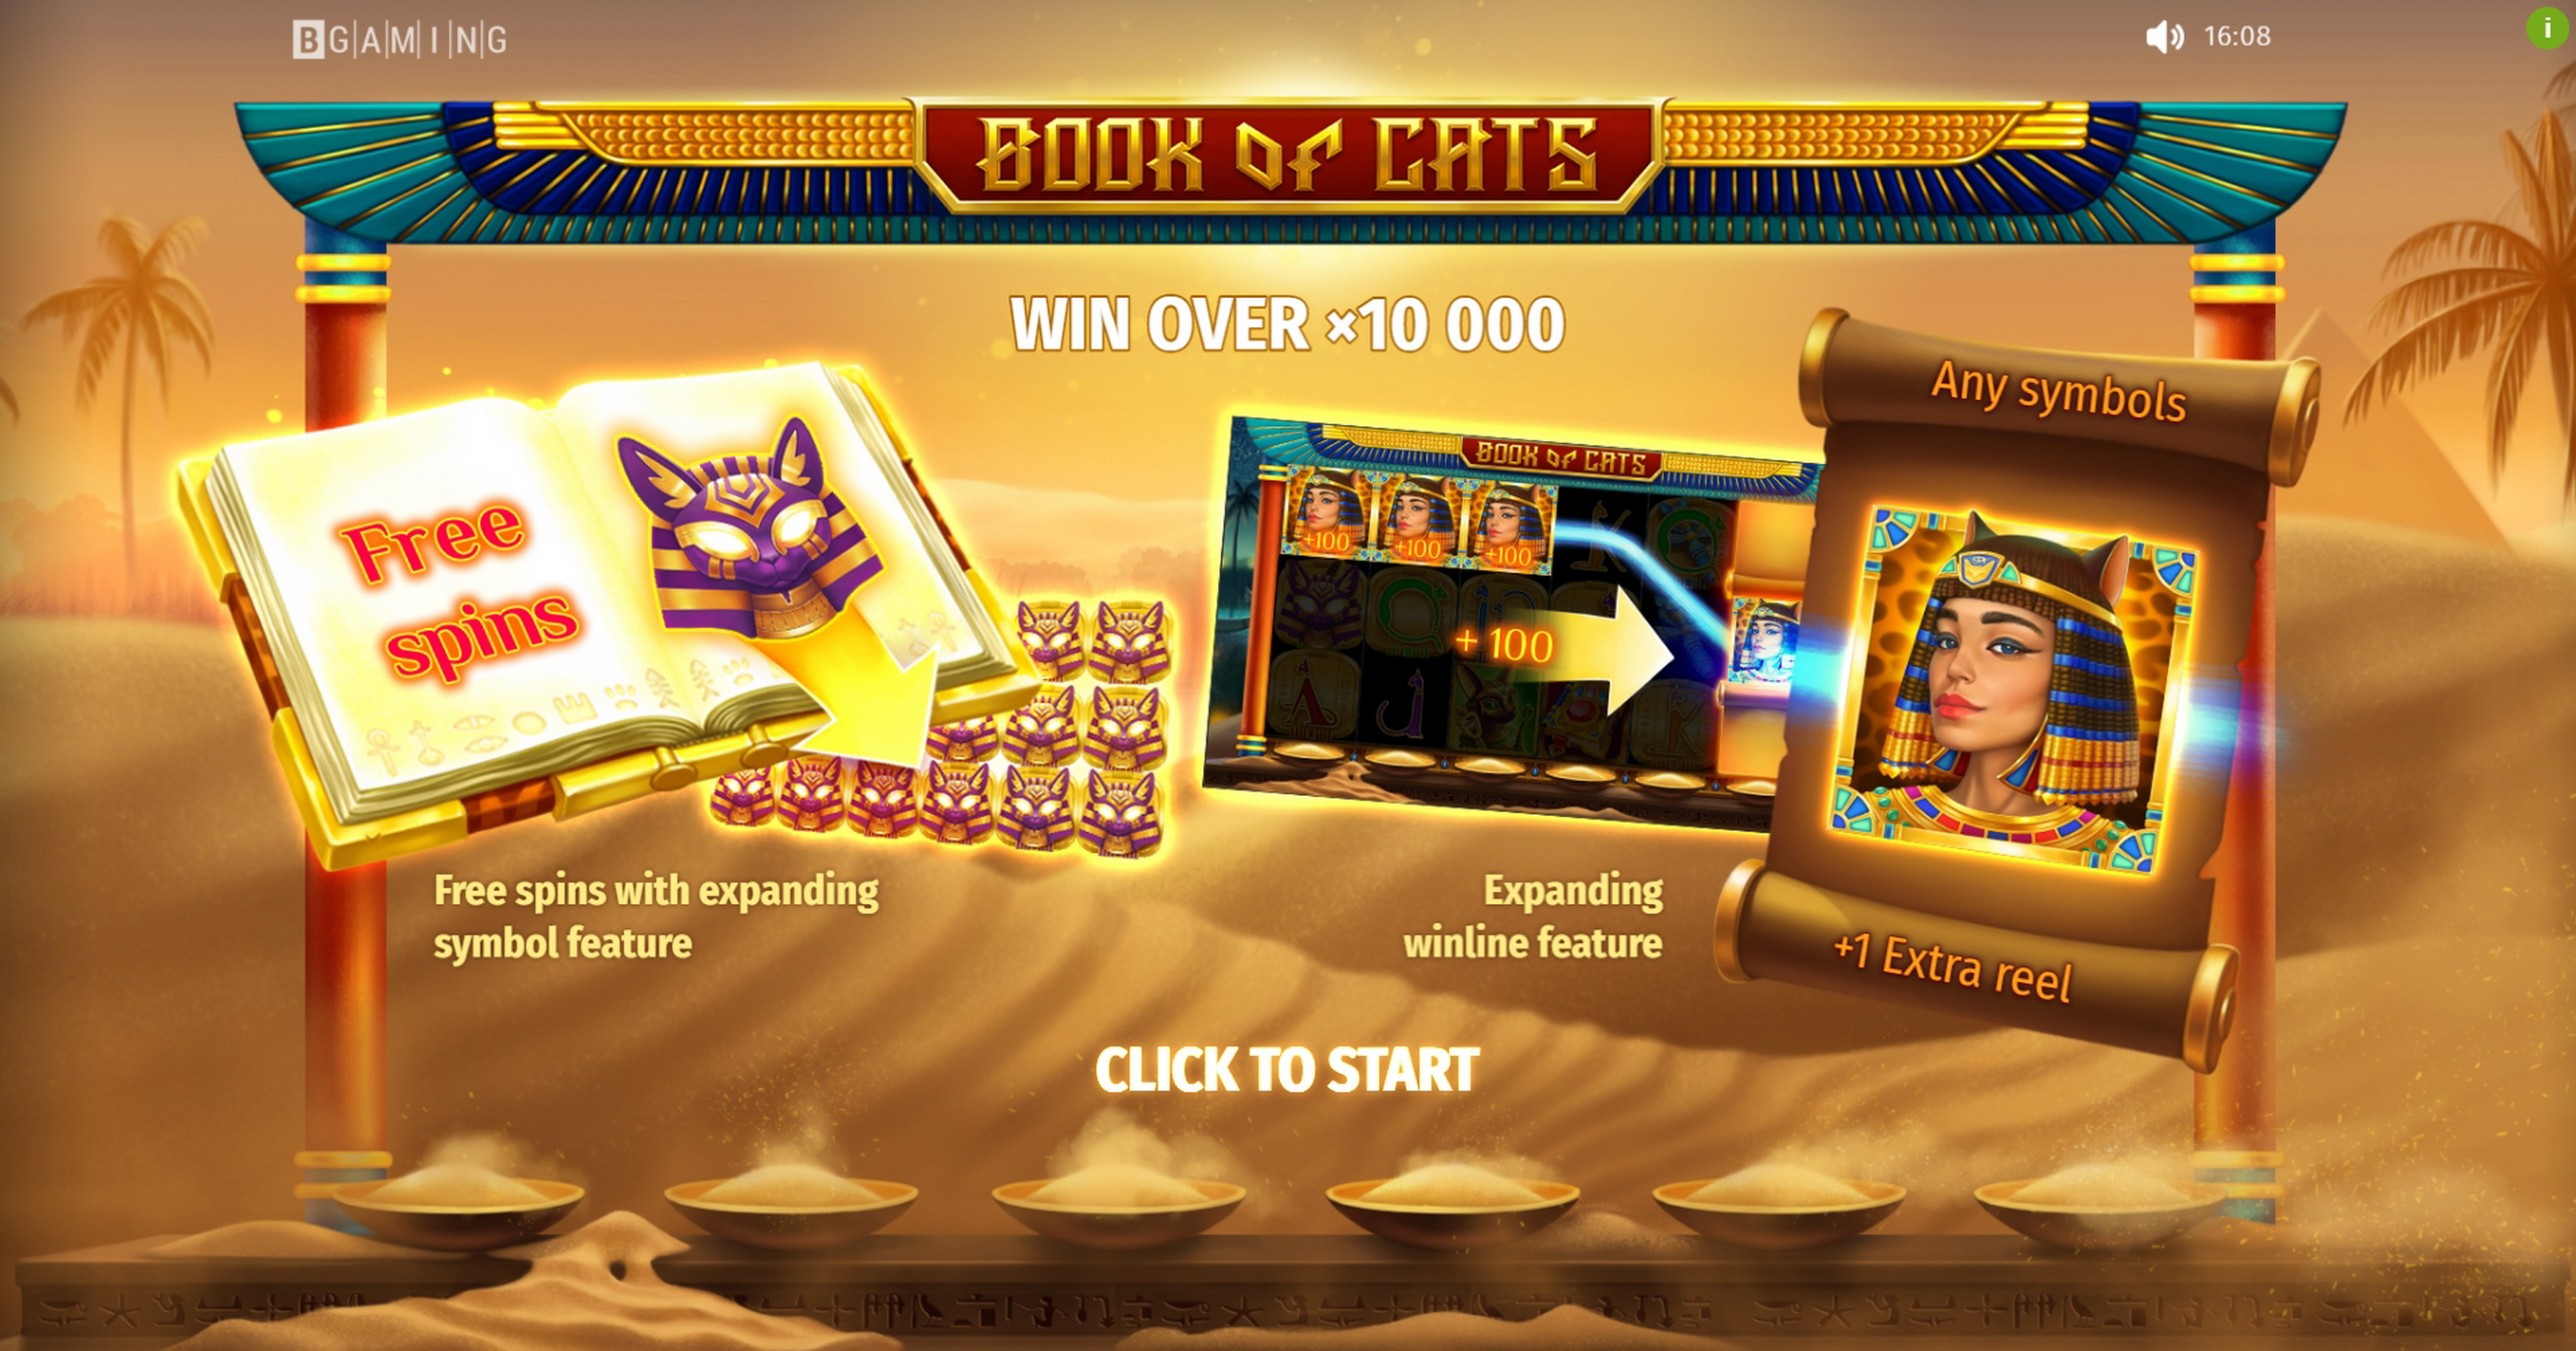 Play Book Of Cats Free Casino Slot Game by BGAMING